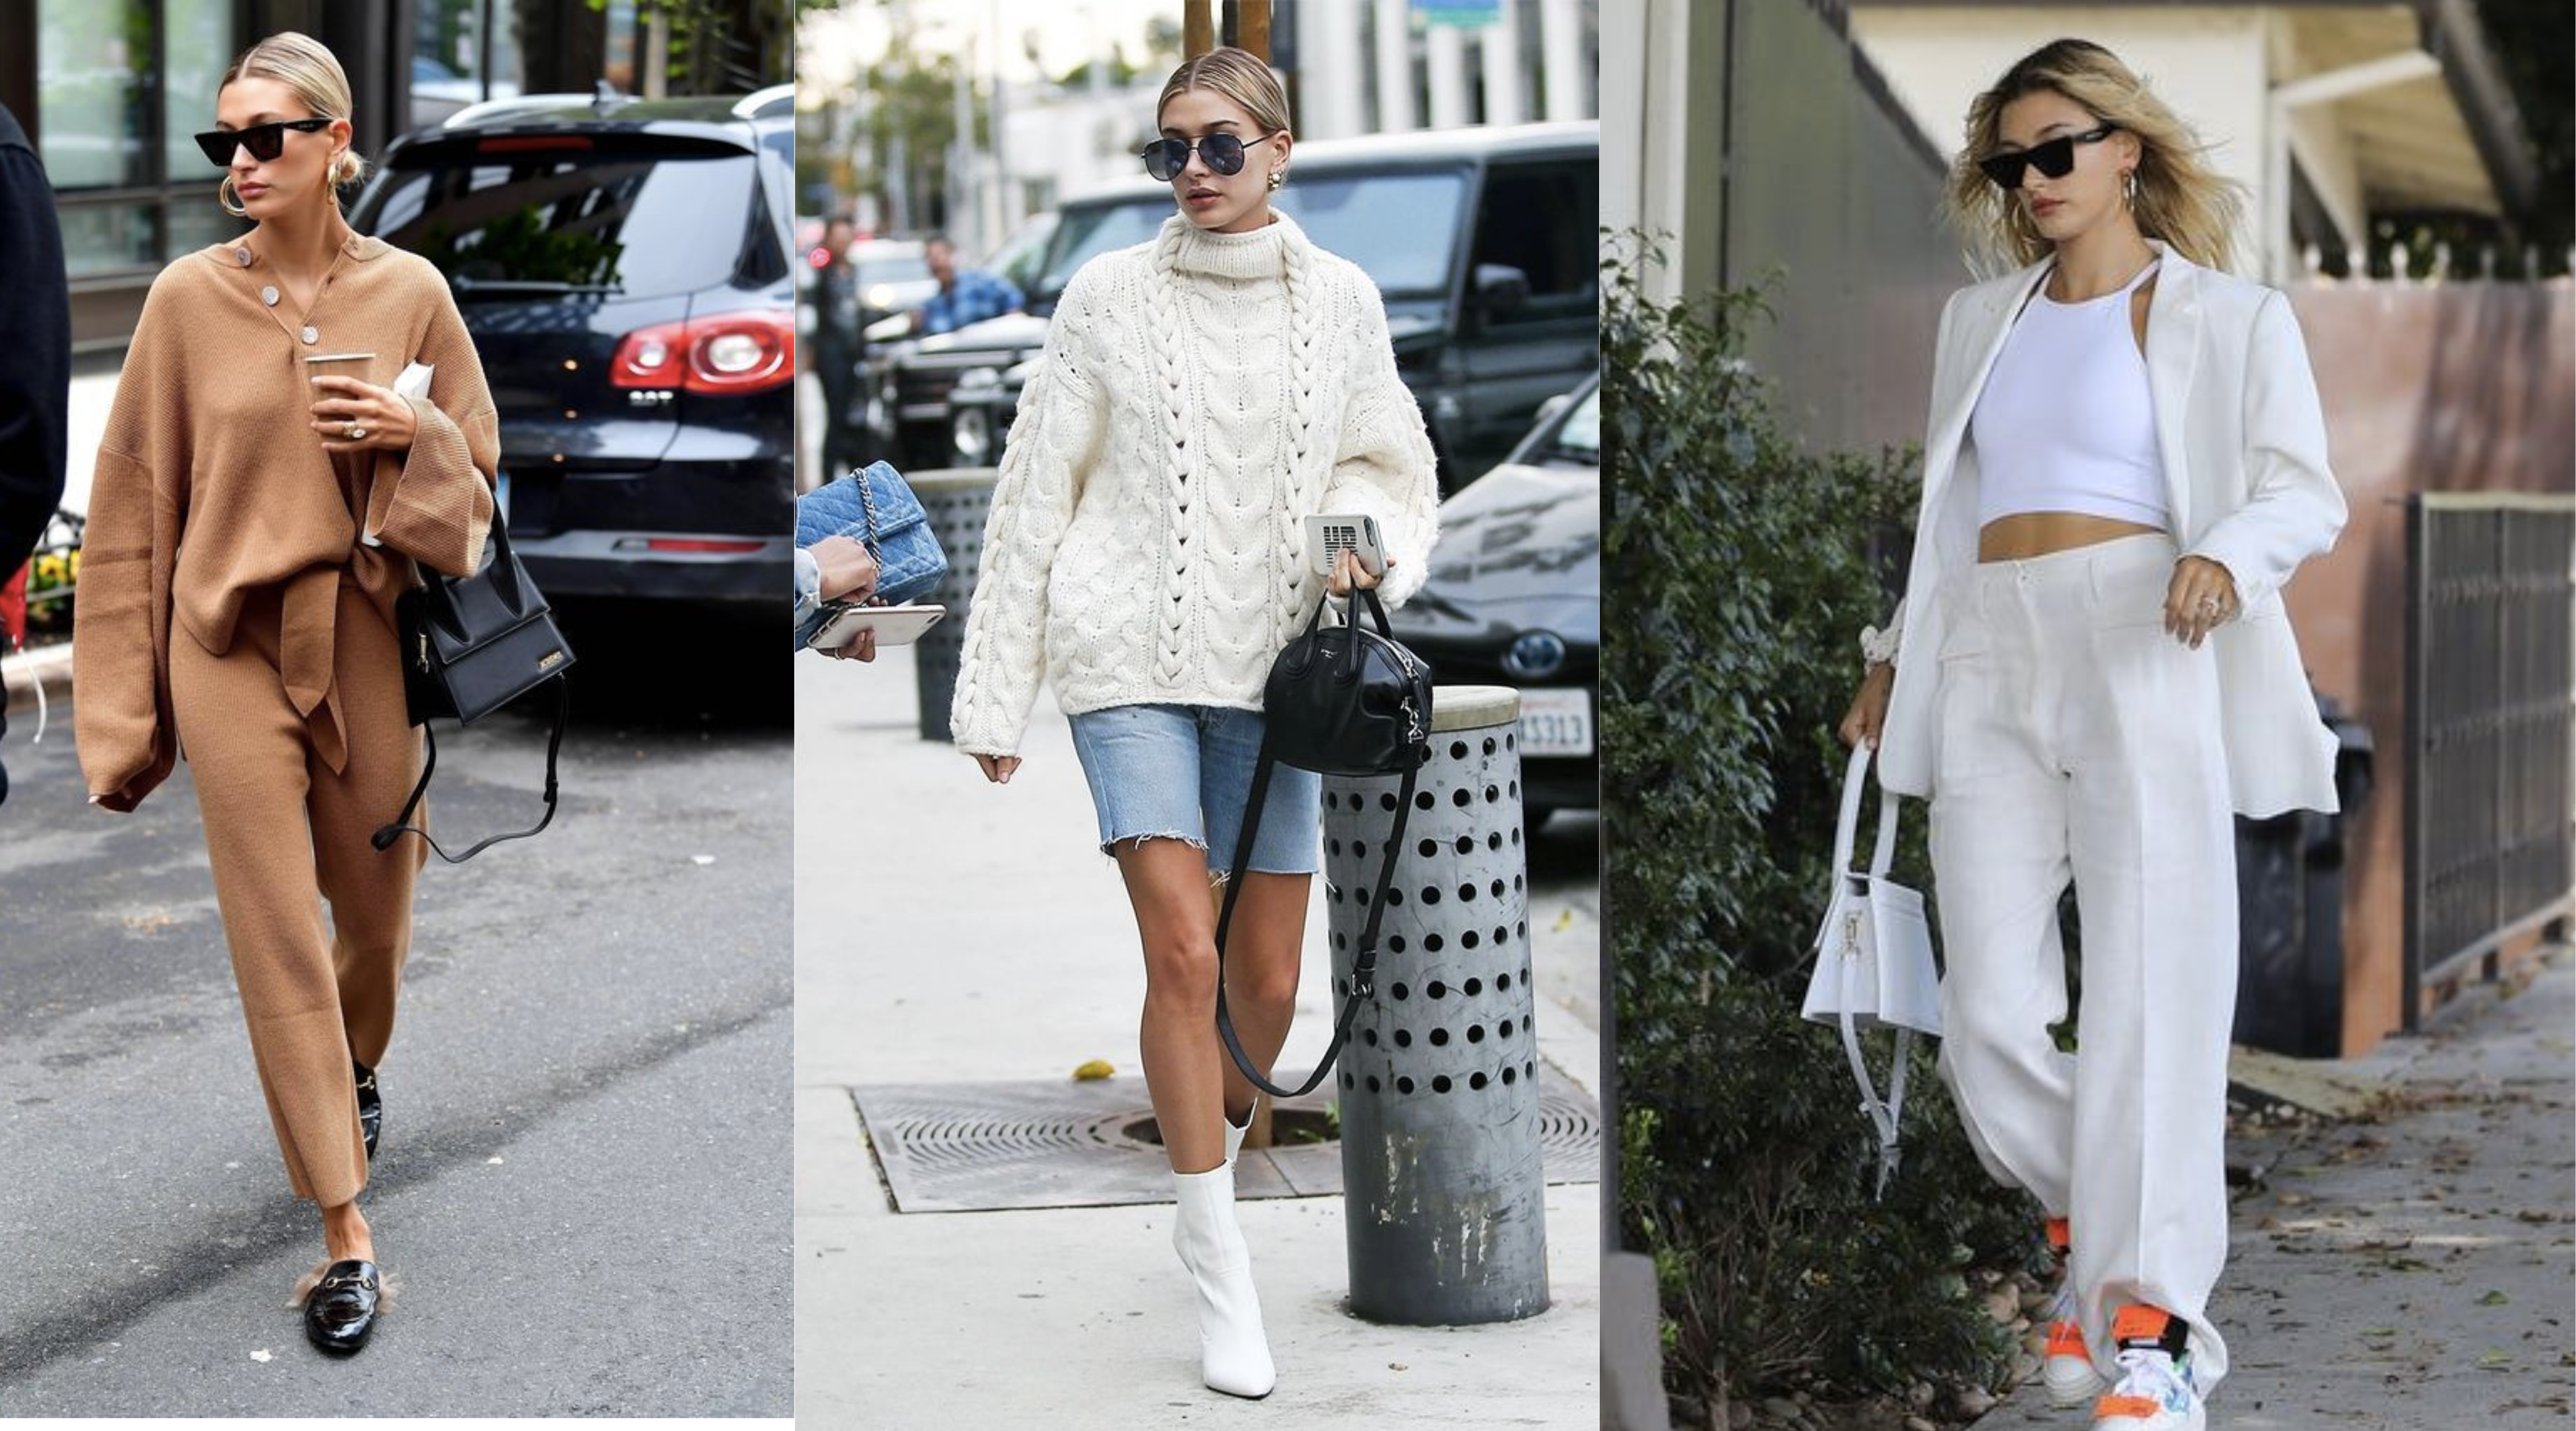 Hailey Baldwin's Style: The Girl Who Grew Up On The Red Carpet